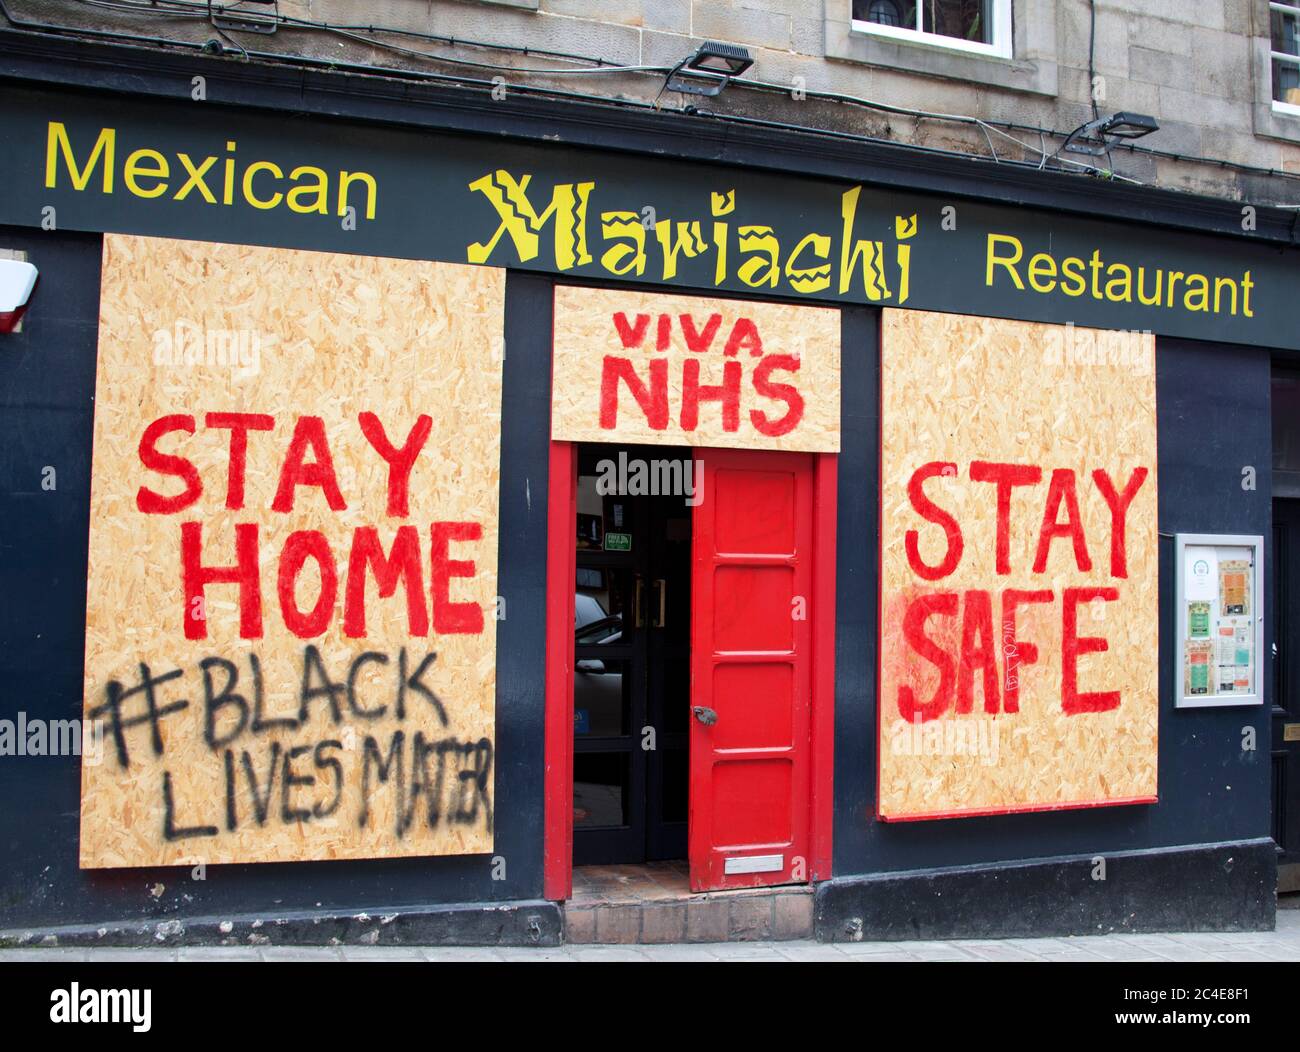 Edinburgh, Scotland, UK. 26 June 2020. Some city centre pubs and restaurants are still boarded up as they were at the beginning of the Pandemic crisis in Scotland, but others are showing some signs of life such as painting and decoration and perhaps alterations to meet the new requirements of social distancing. Pictured: Mariachi Mexican Restaurant  in Victoria Street, which has the door ajar but reamains boarded up. Stock Photo